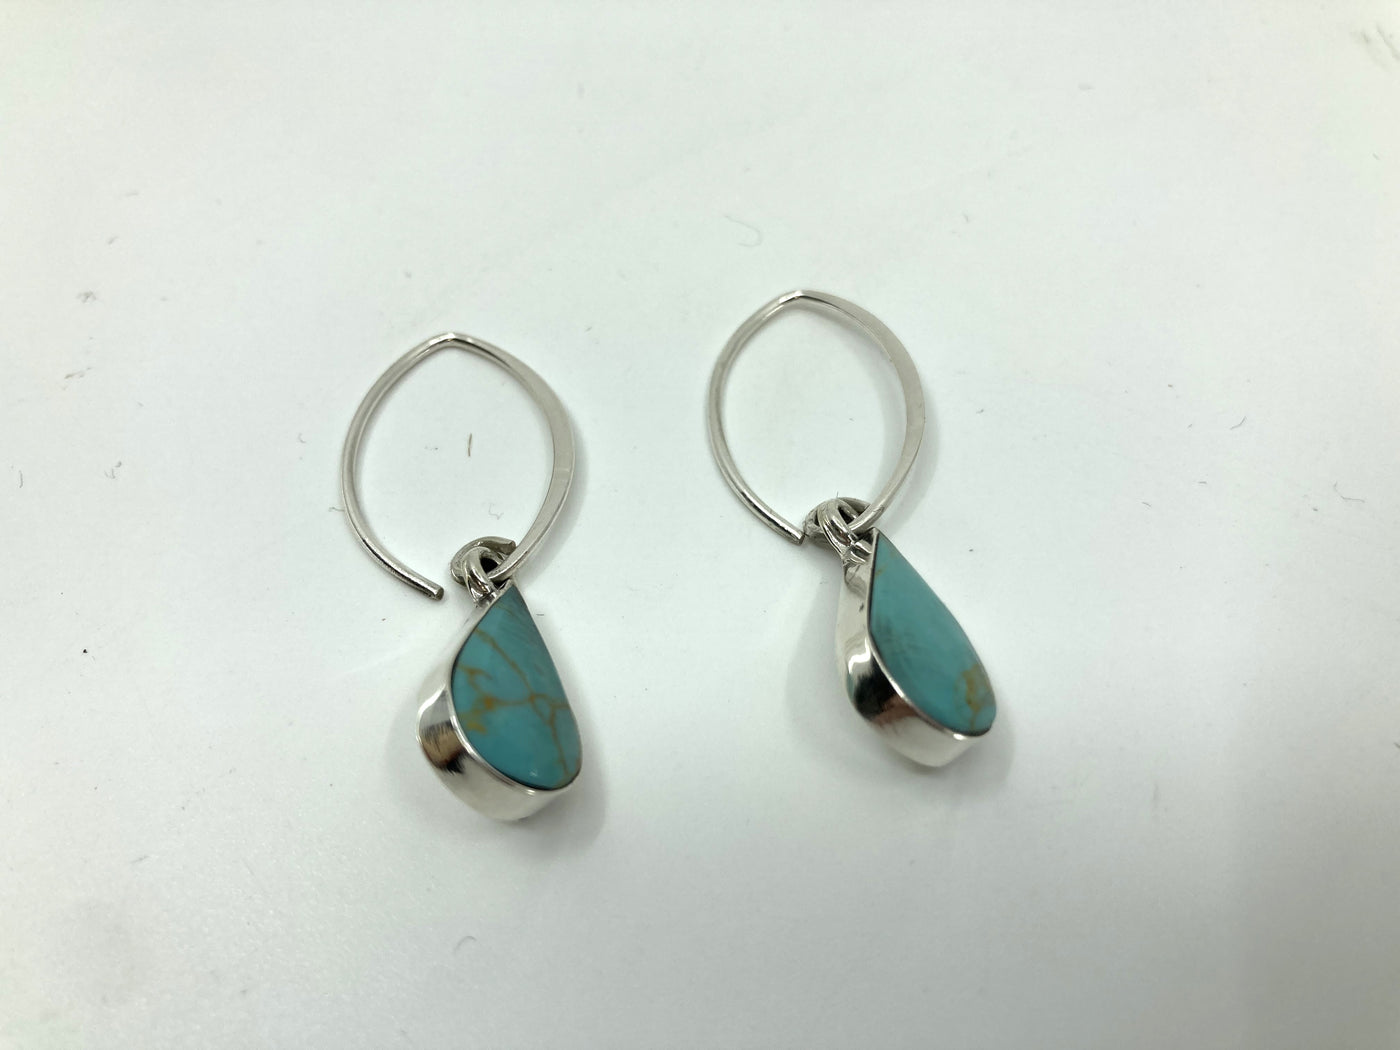 Handmade Sterling Silver and Turquoise Hook Earrings PSTPE55